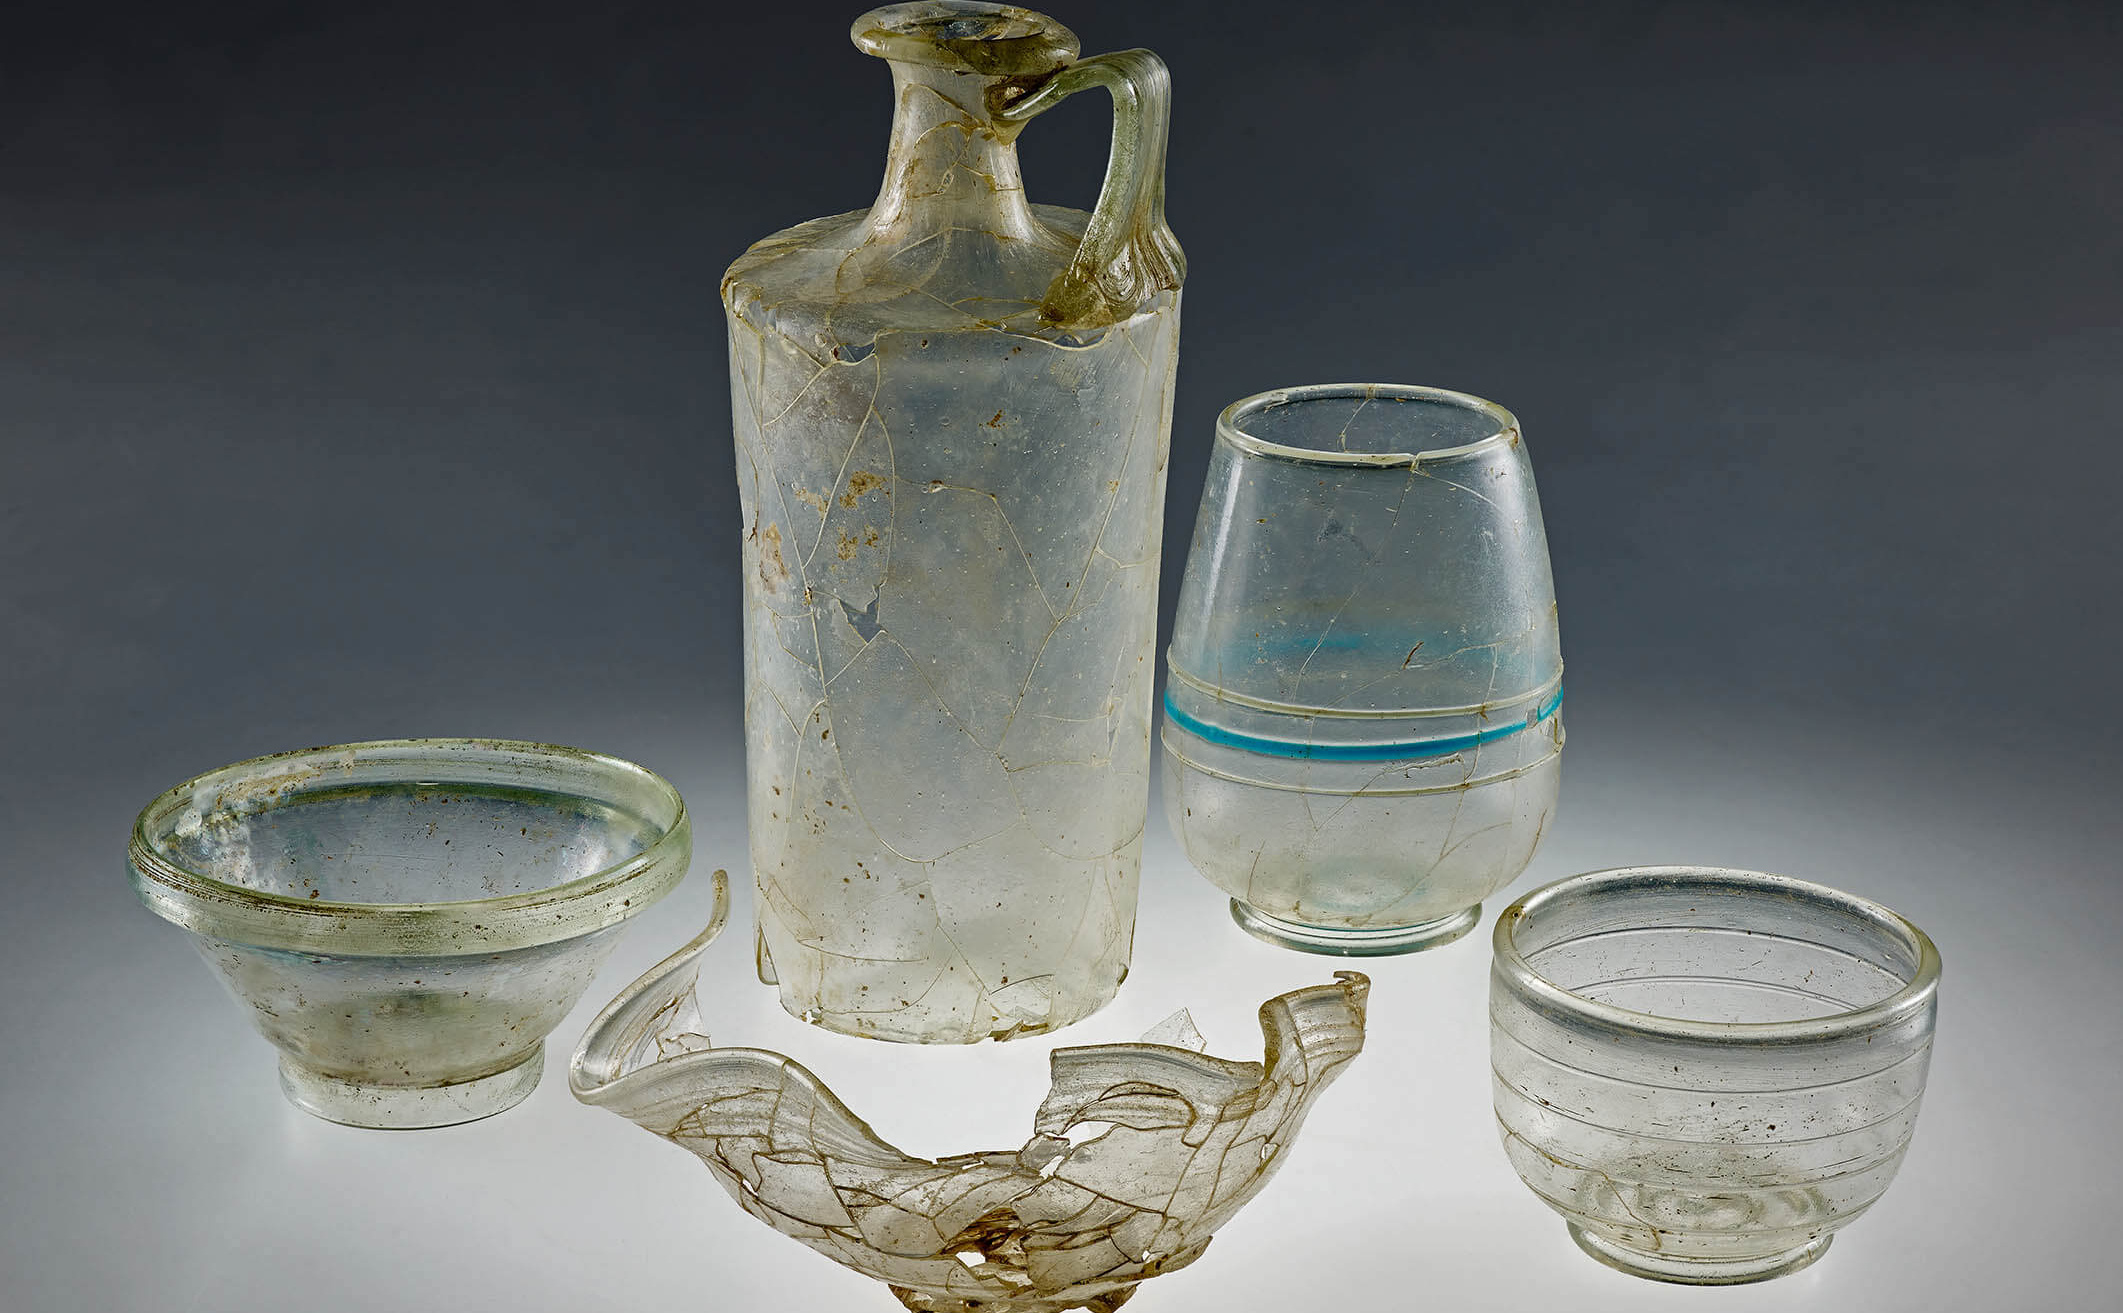 A photo of various glass vessels from a Roman cremation burial in Zülpich.